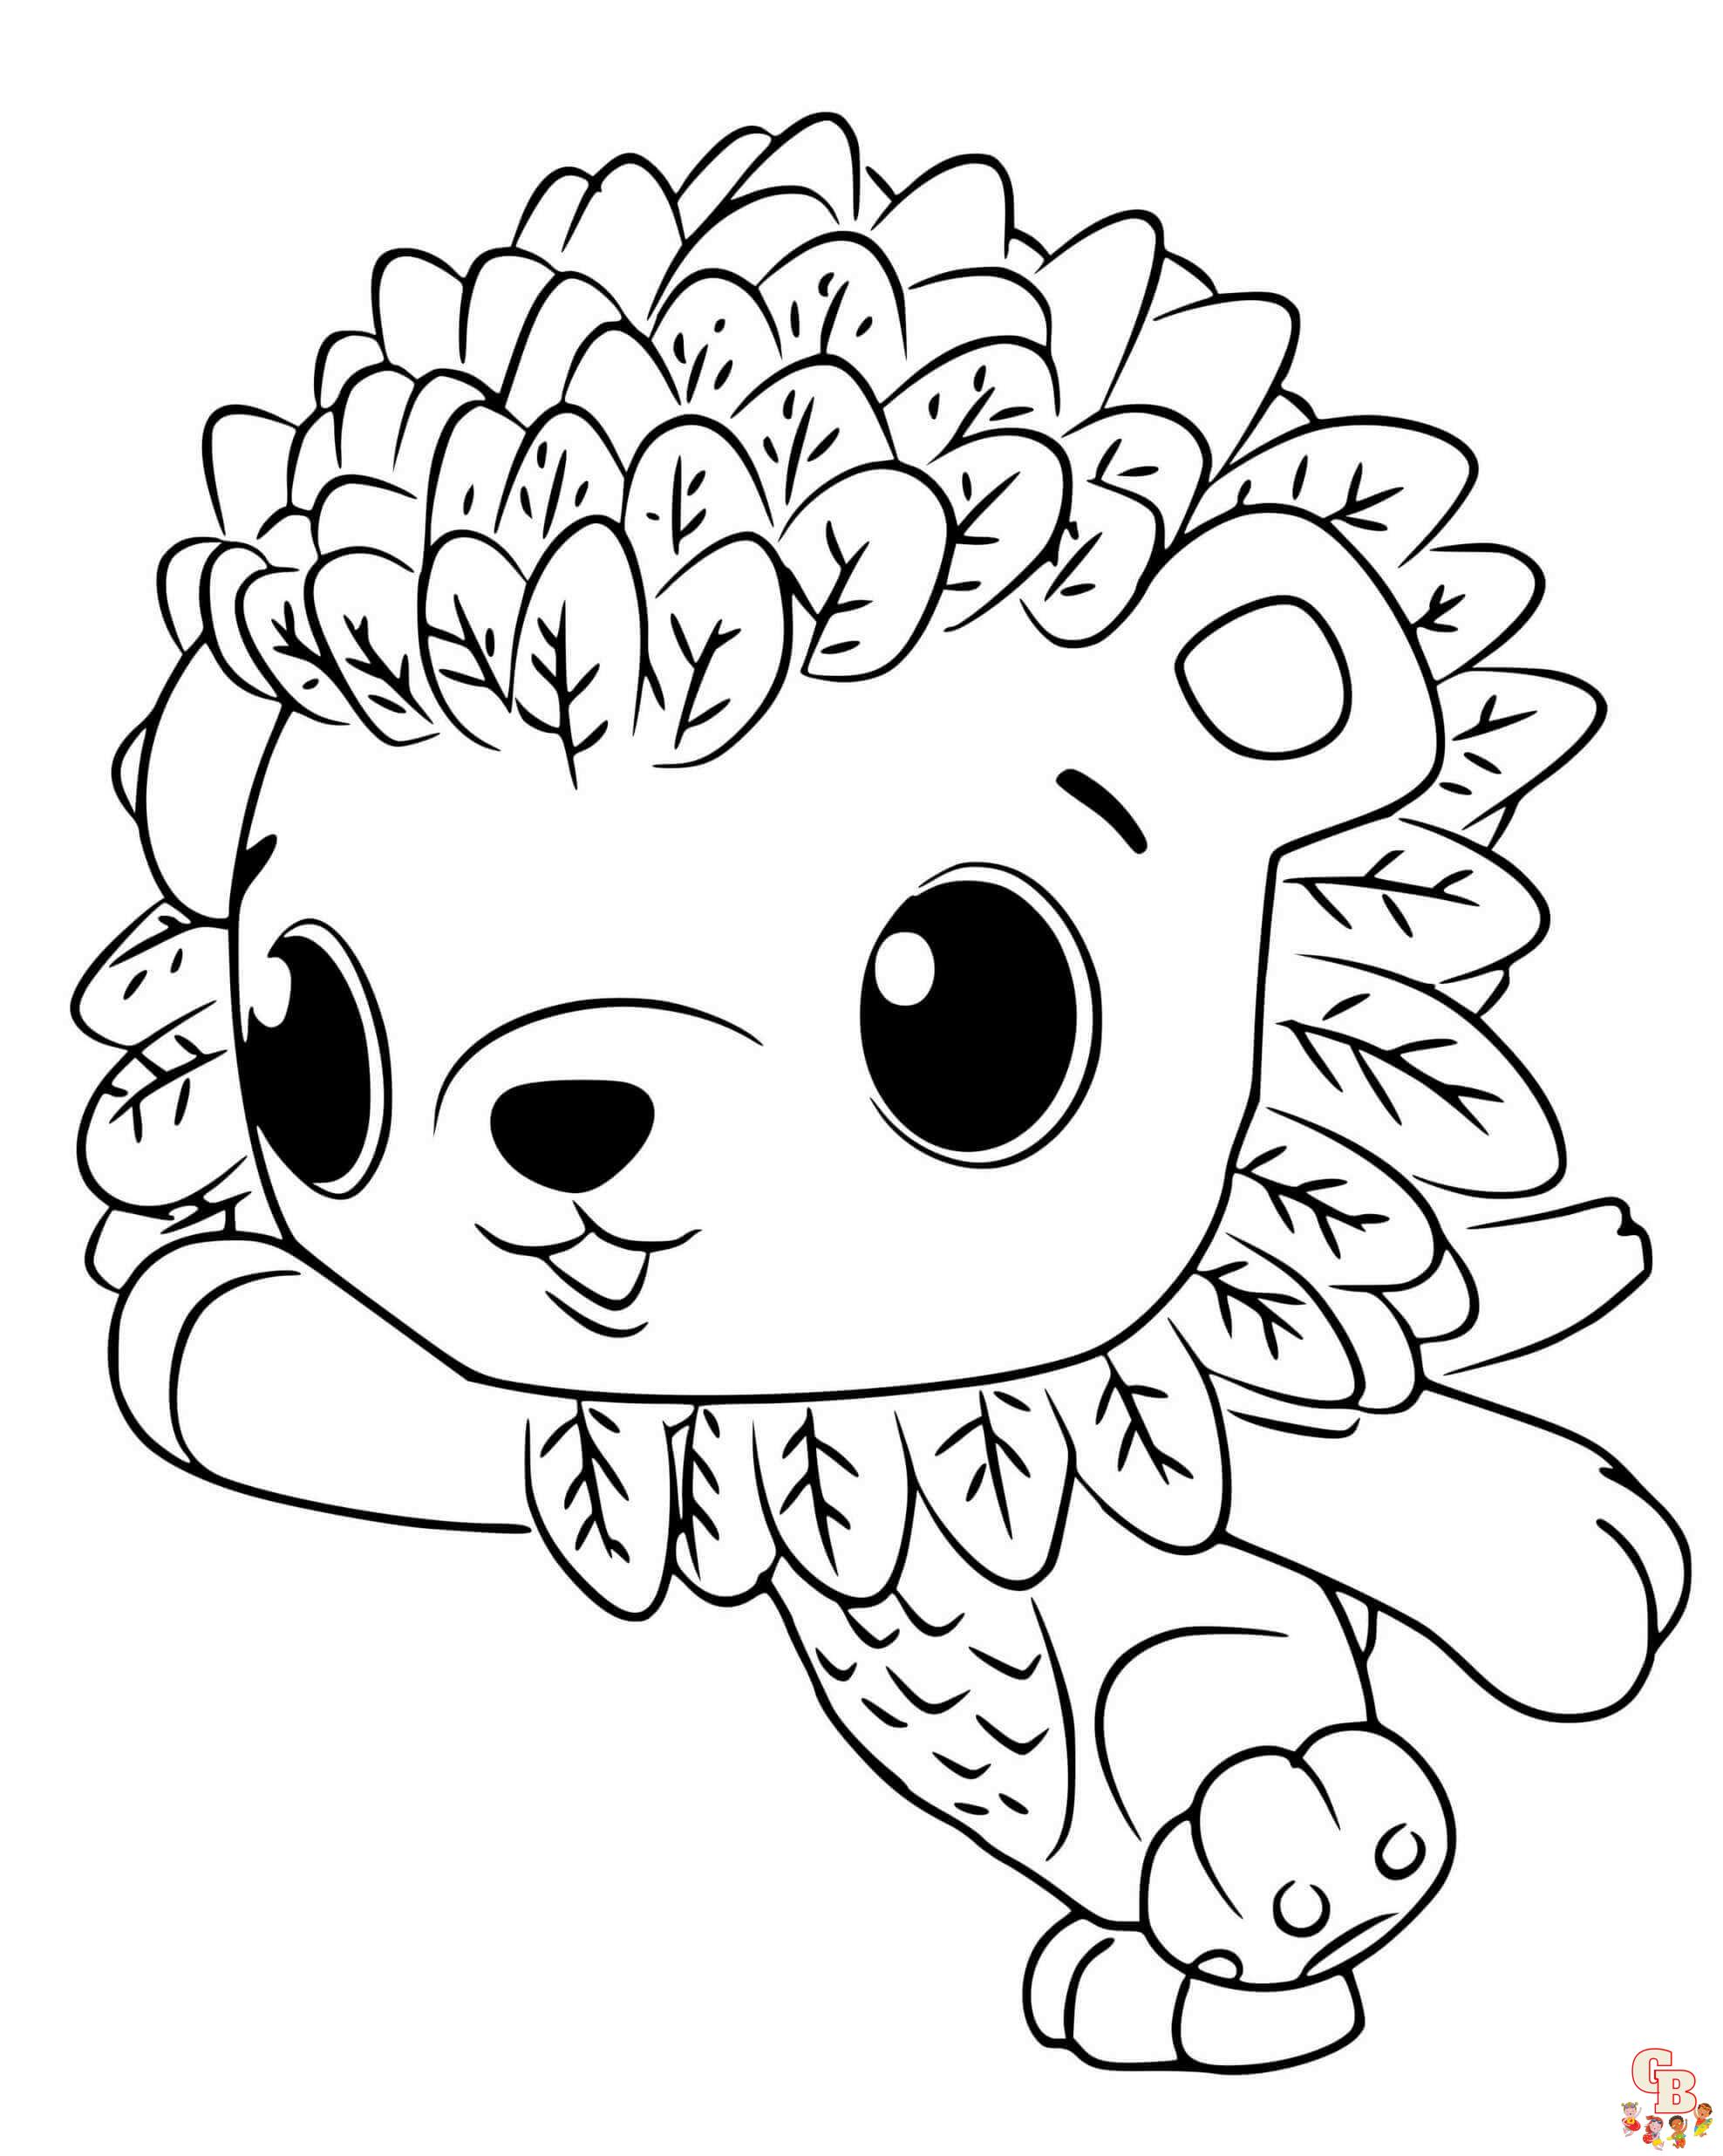 Hatchimal coloring pages to print